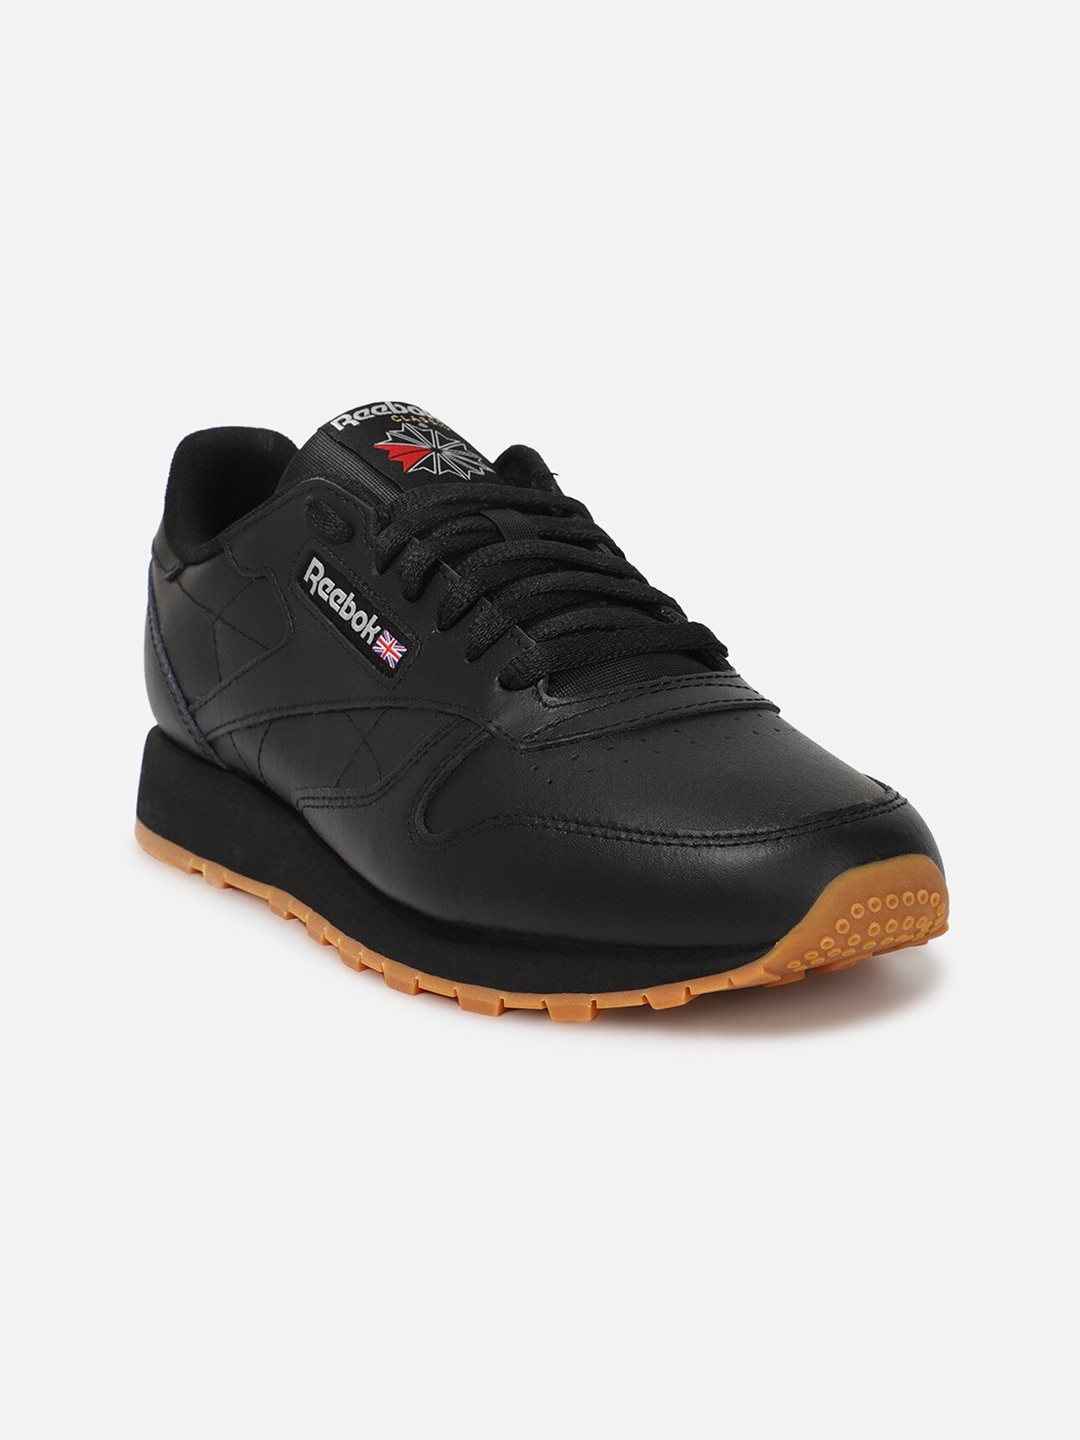 Reebok Classic Leather Running Sports Shoes Price in India